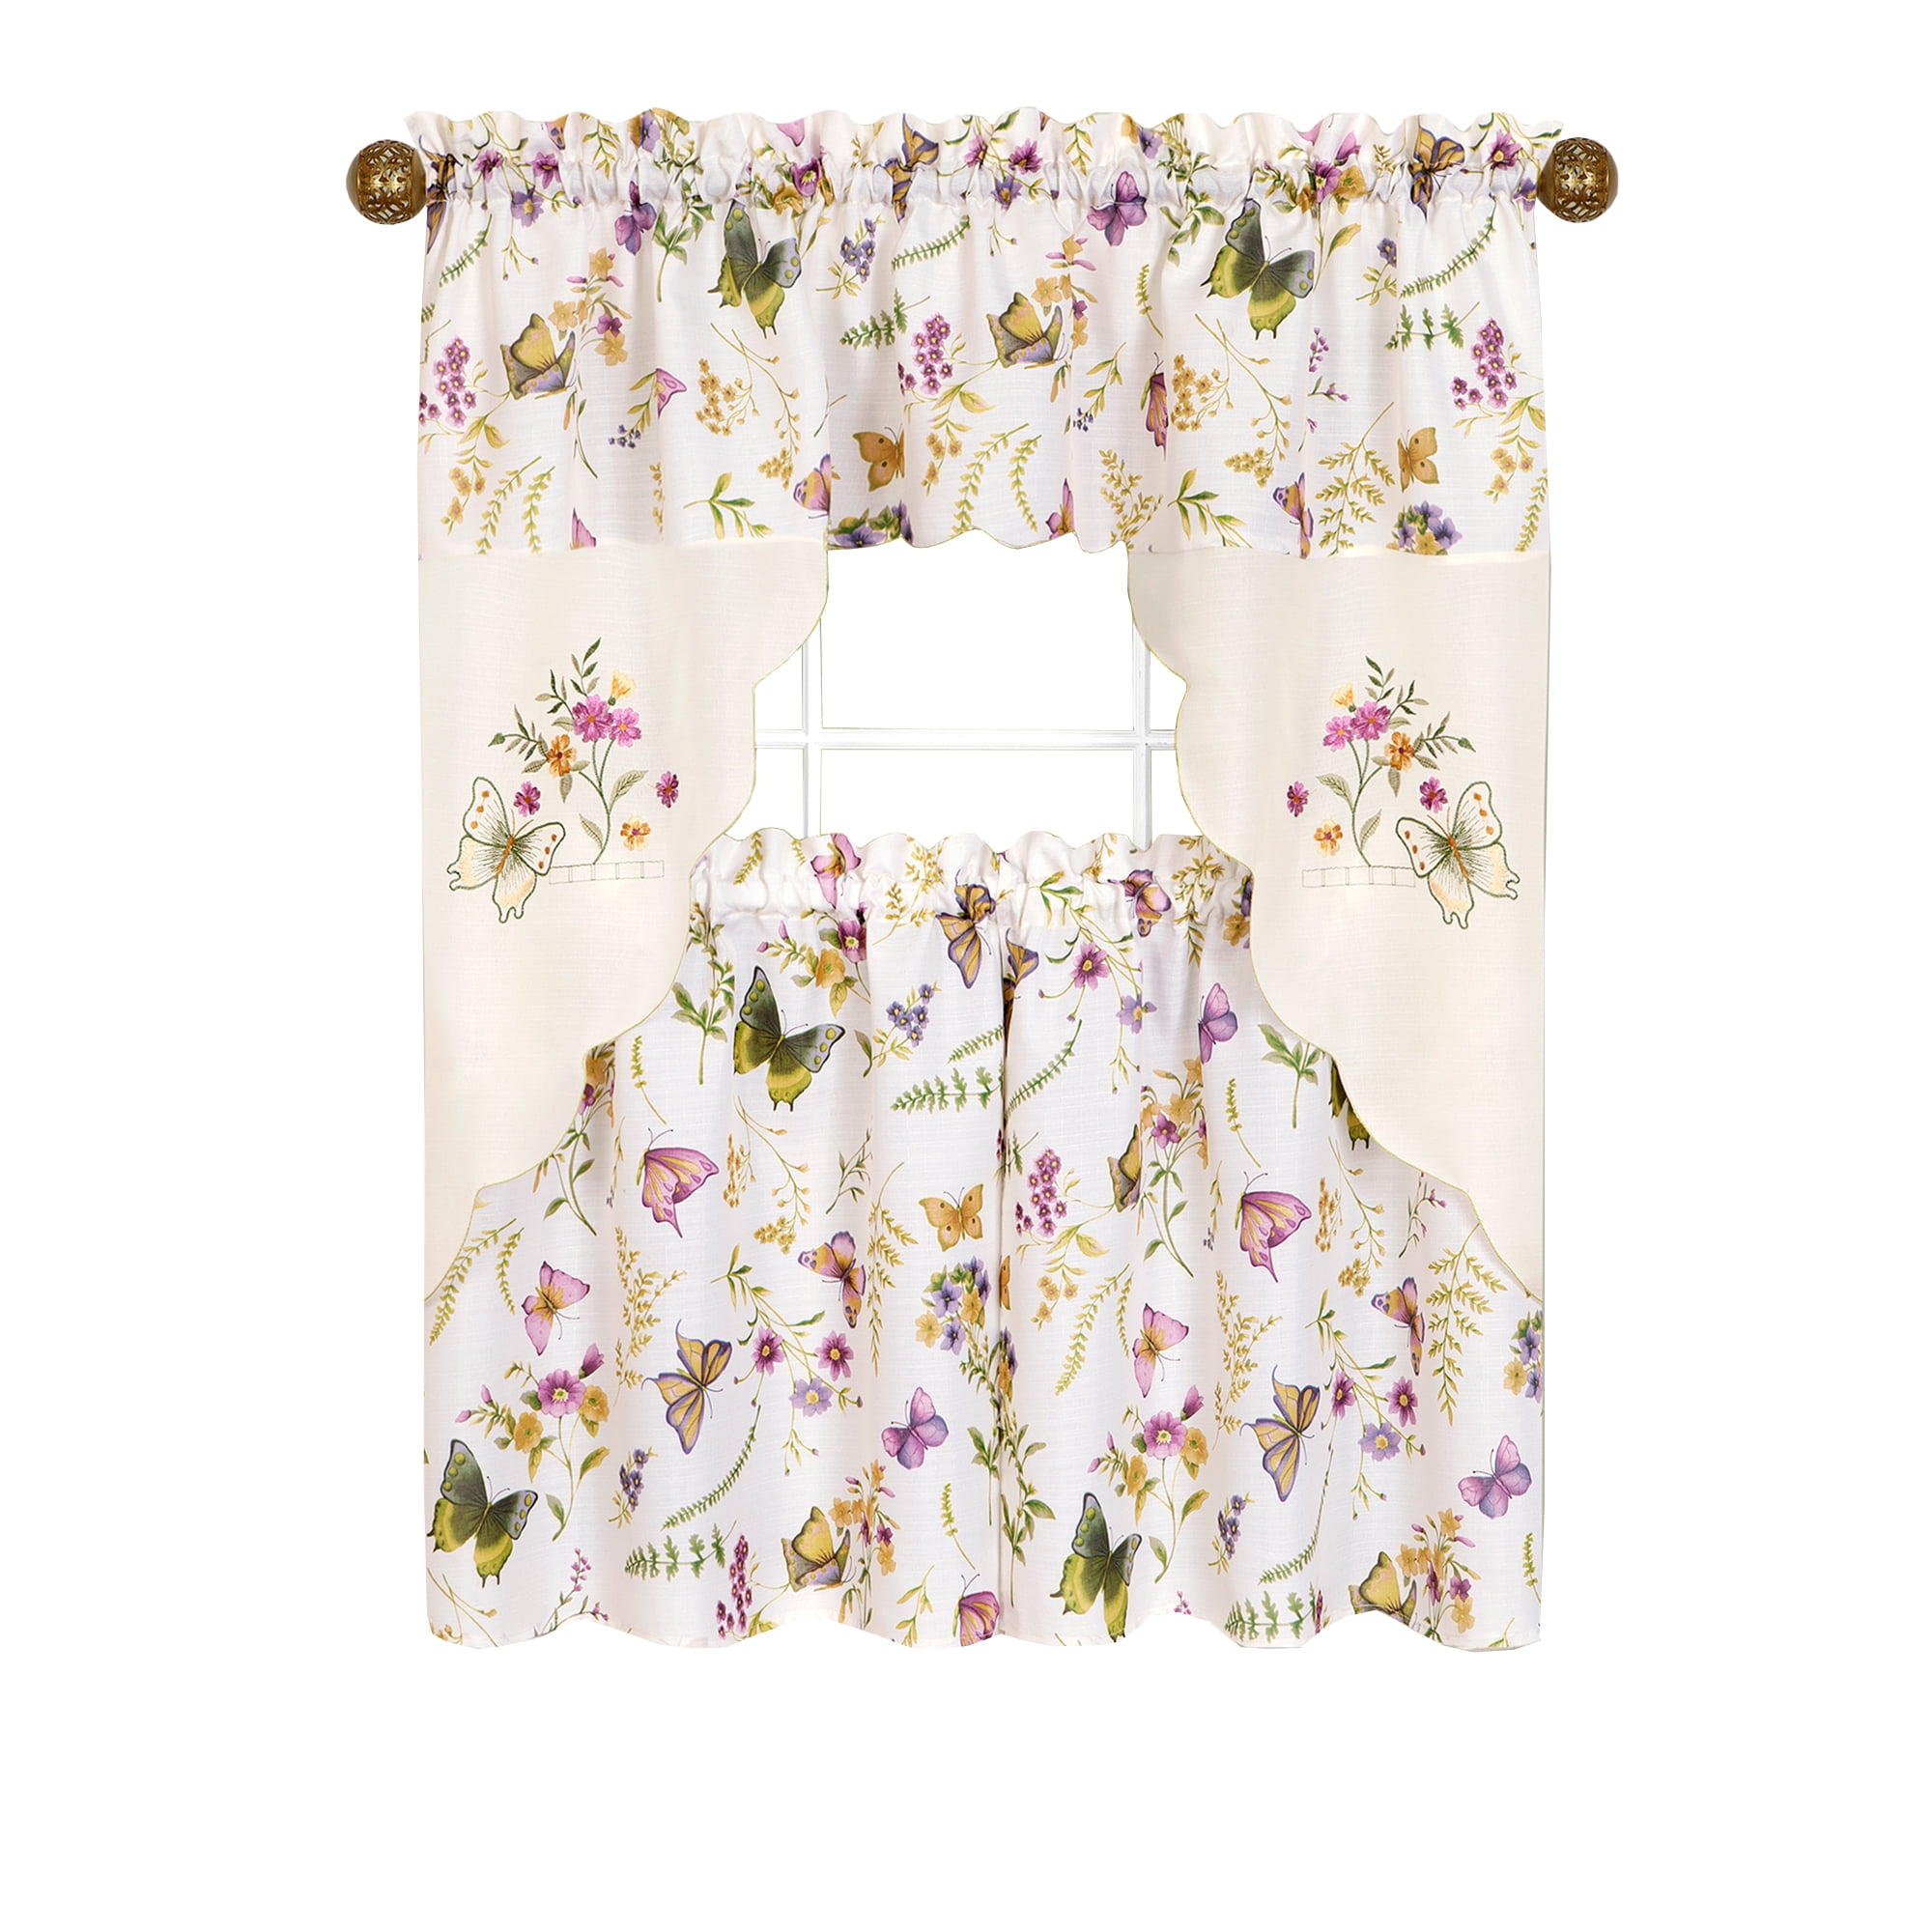 Rooster Lace Valances White or Ivory Tiers and Swags Kitchen Dining Room 